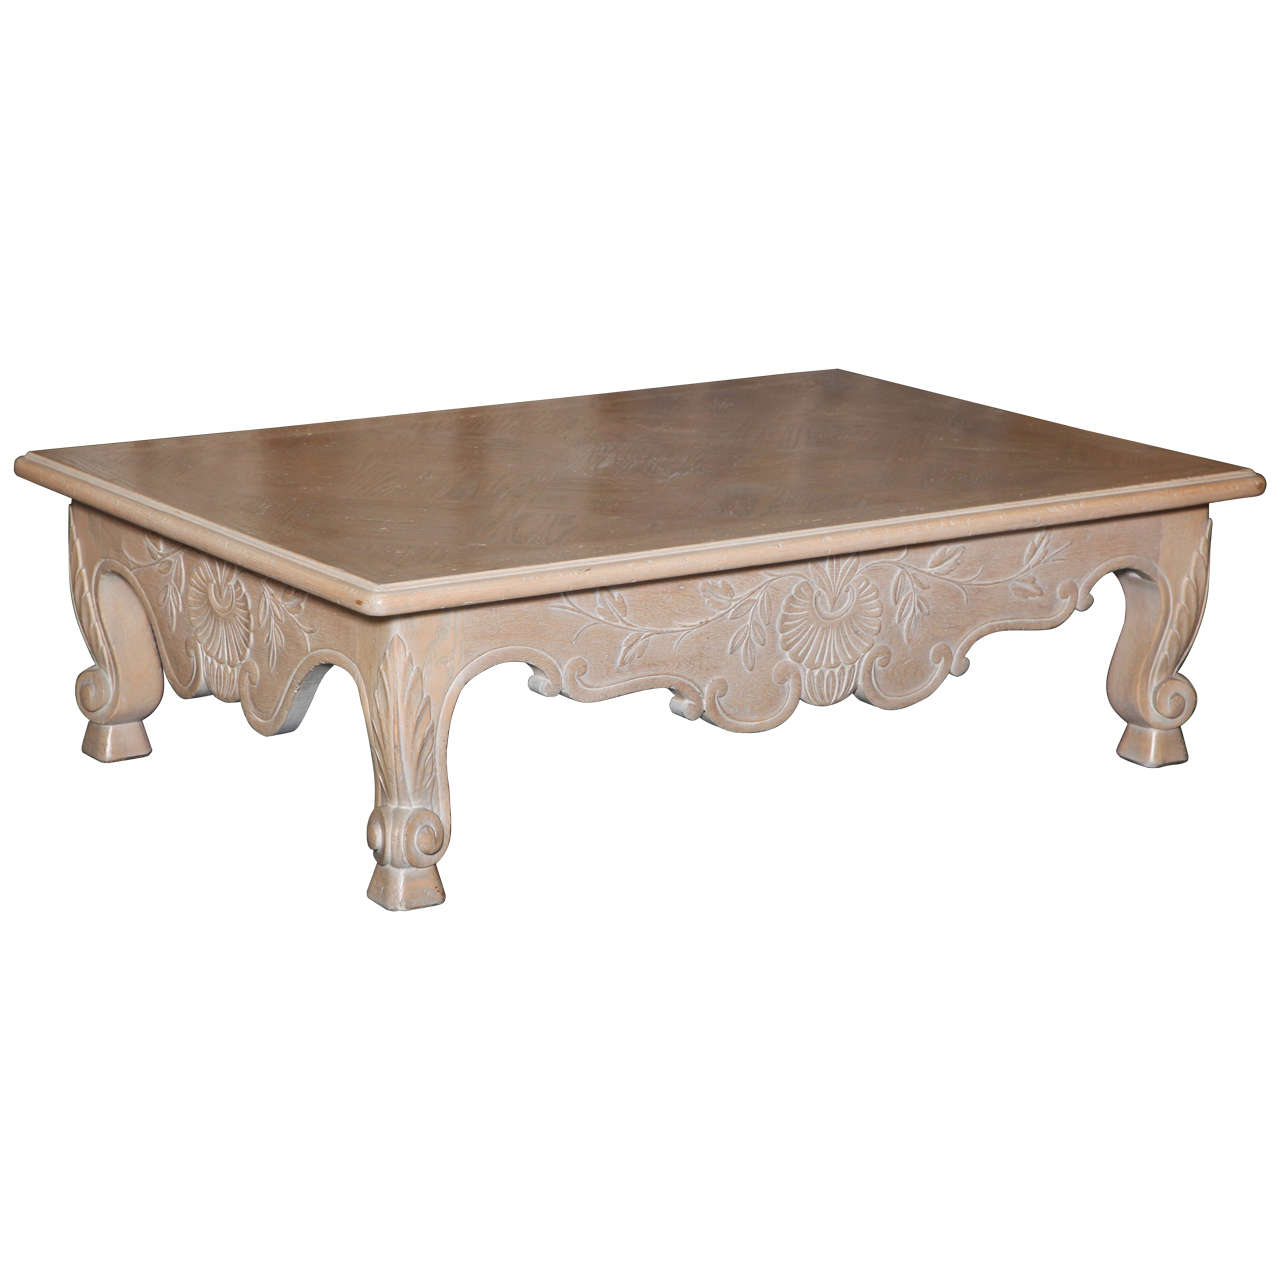 Large White-Washed Oak Baroque Revival Coffee Table